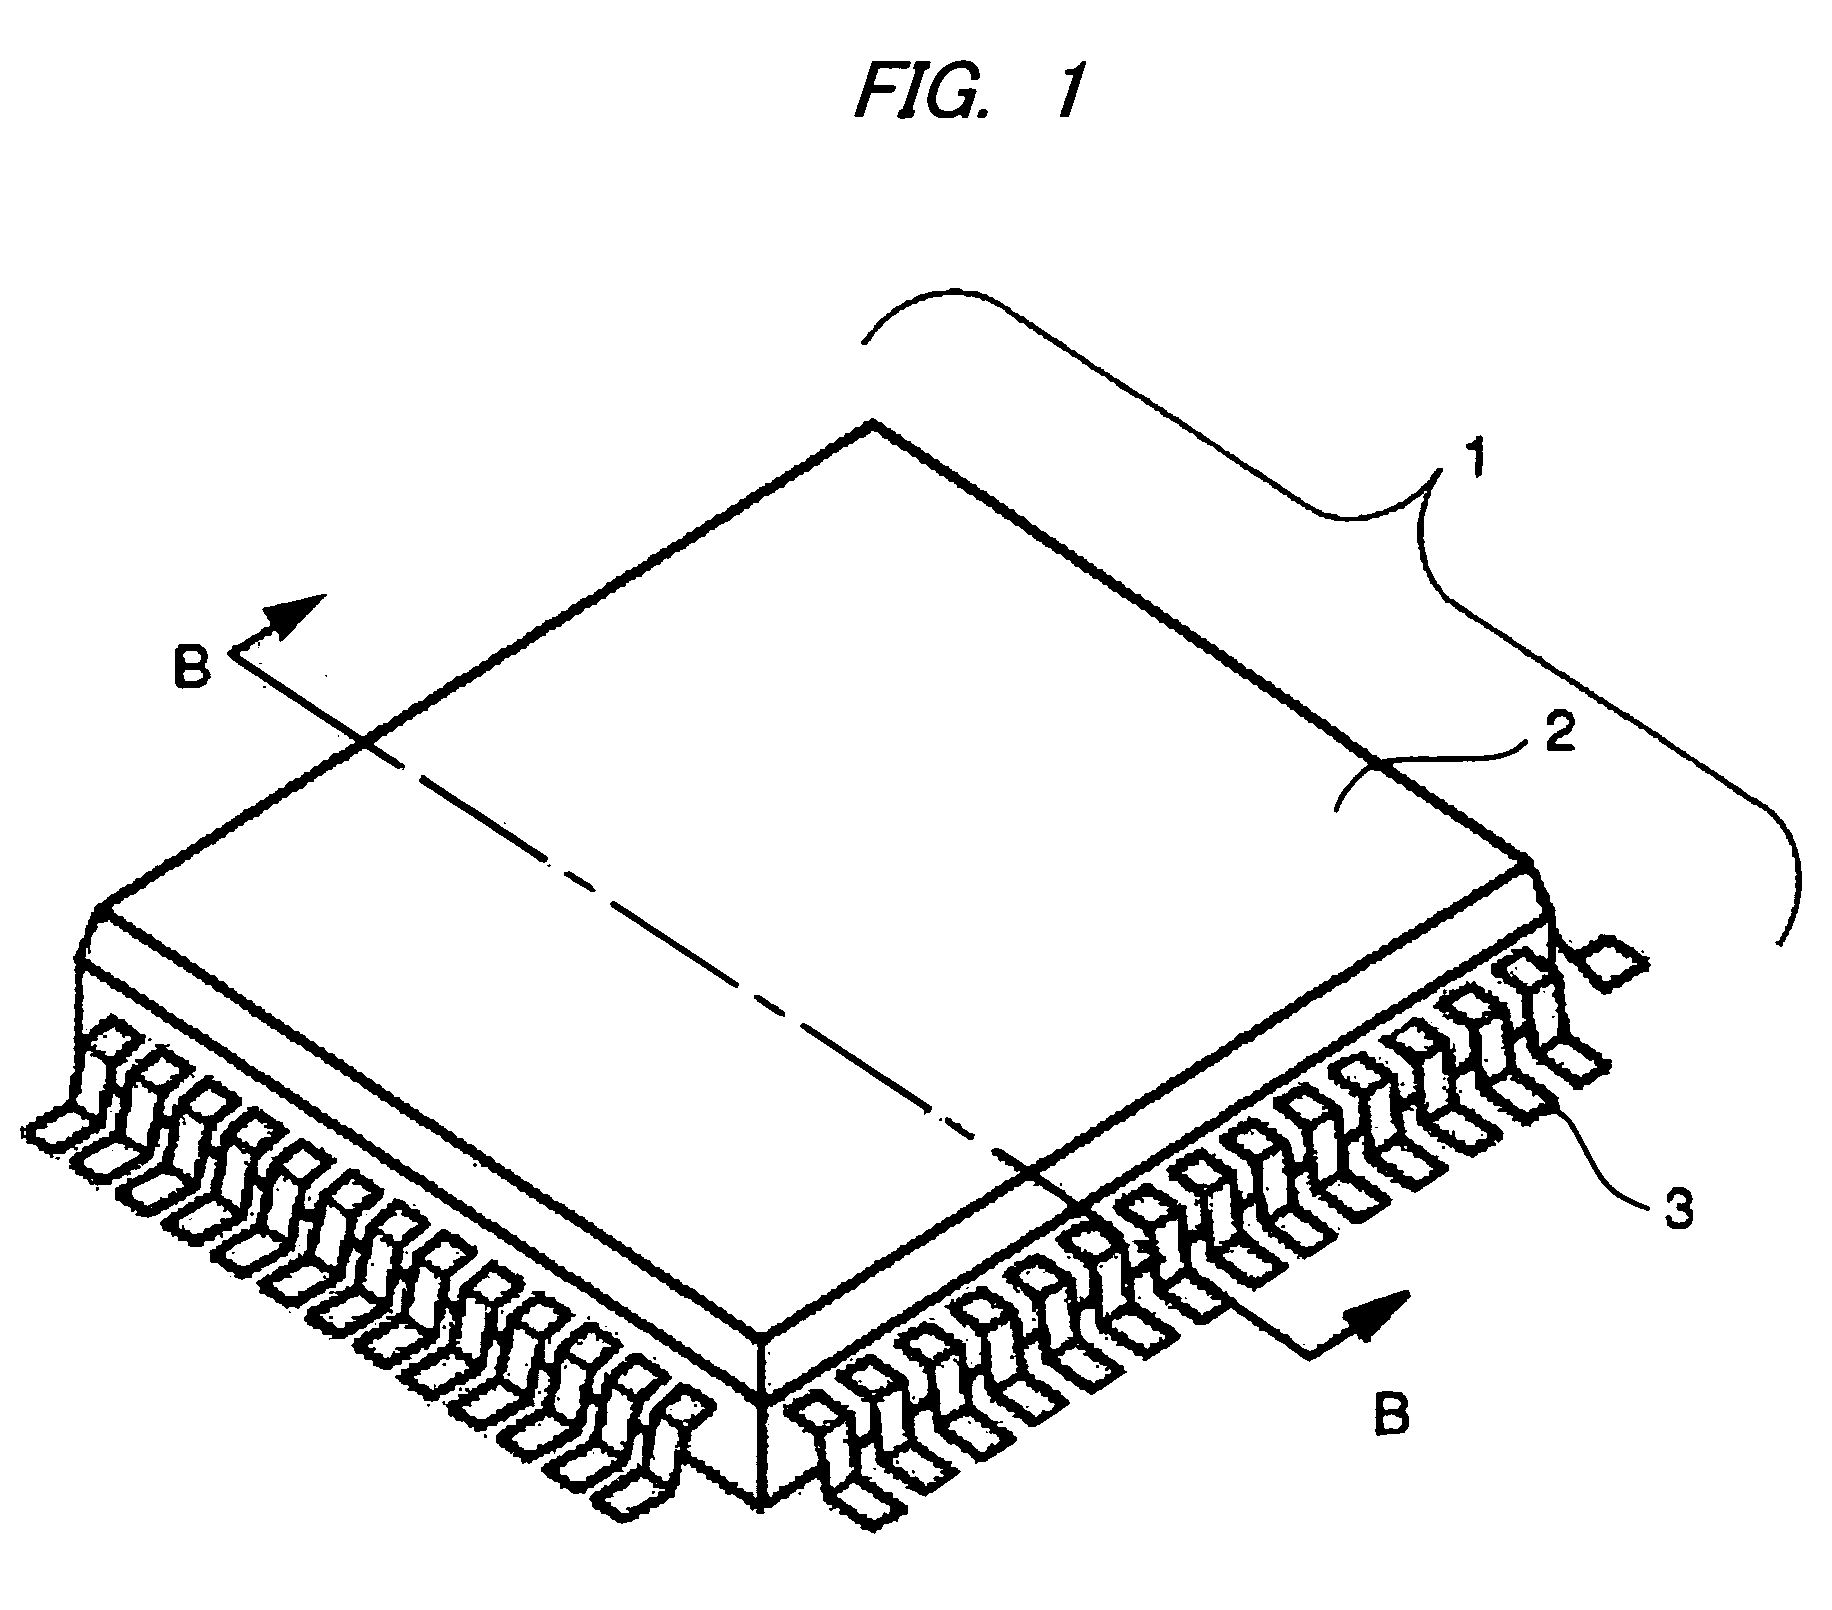 Semiconductor device with acene heat spreader